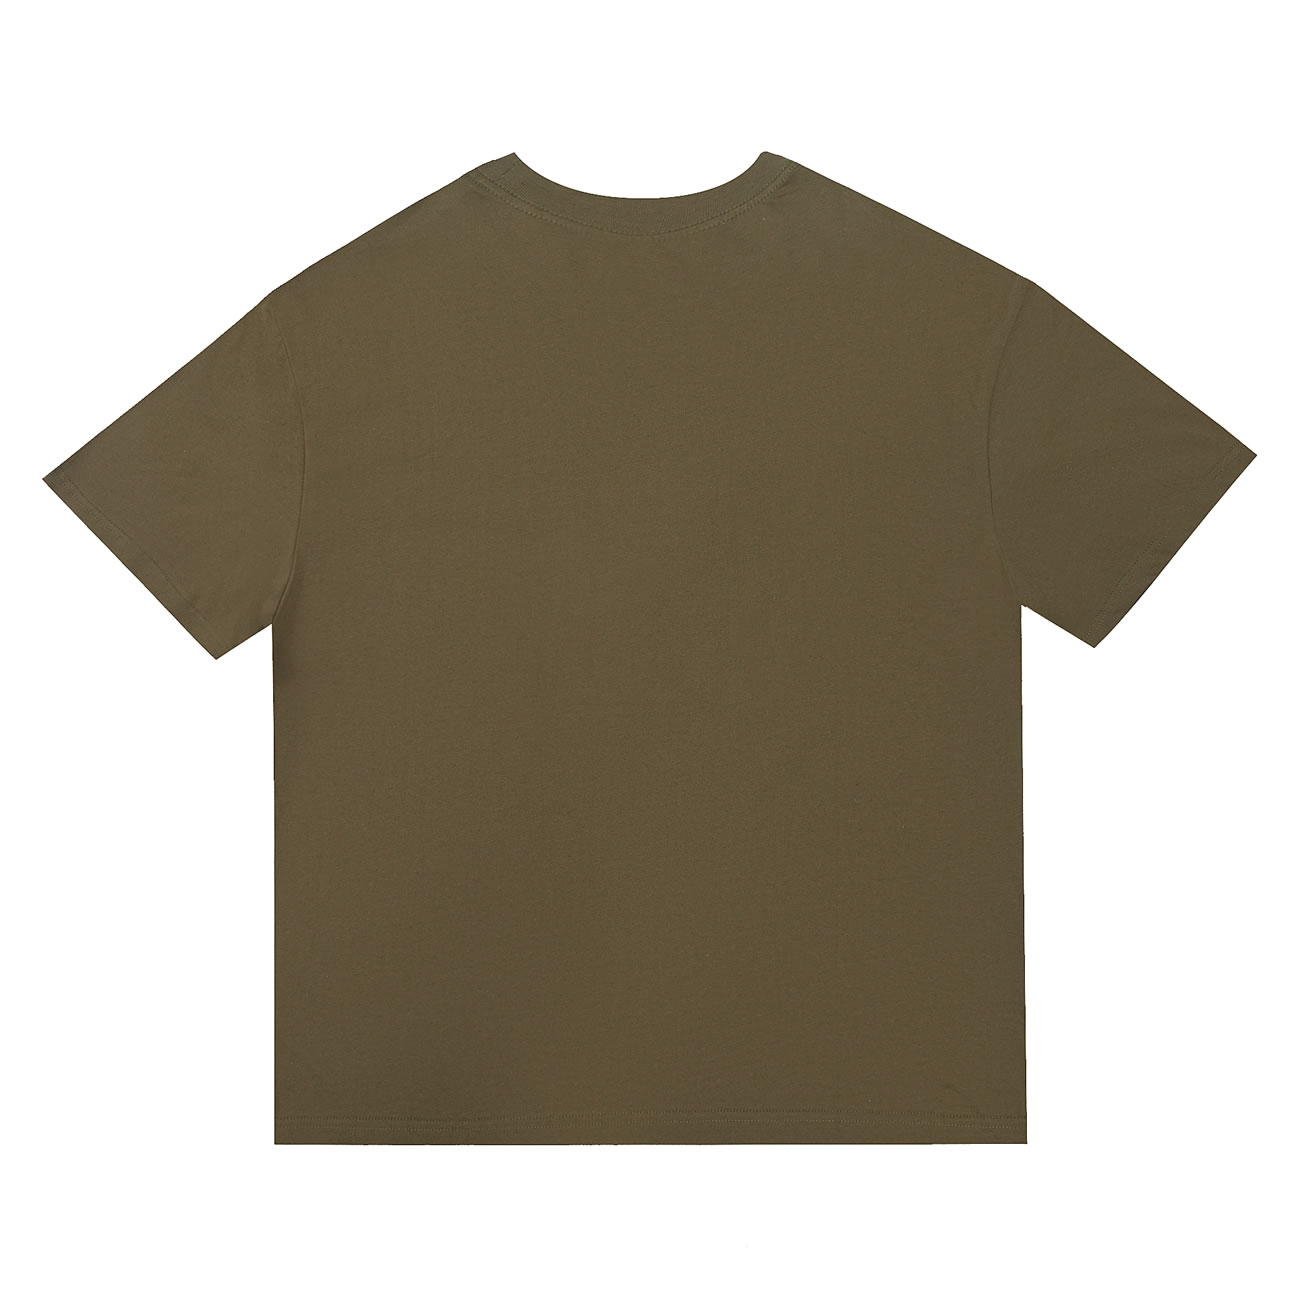 Kanye New T-shirts For Sale